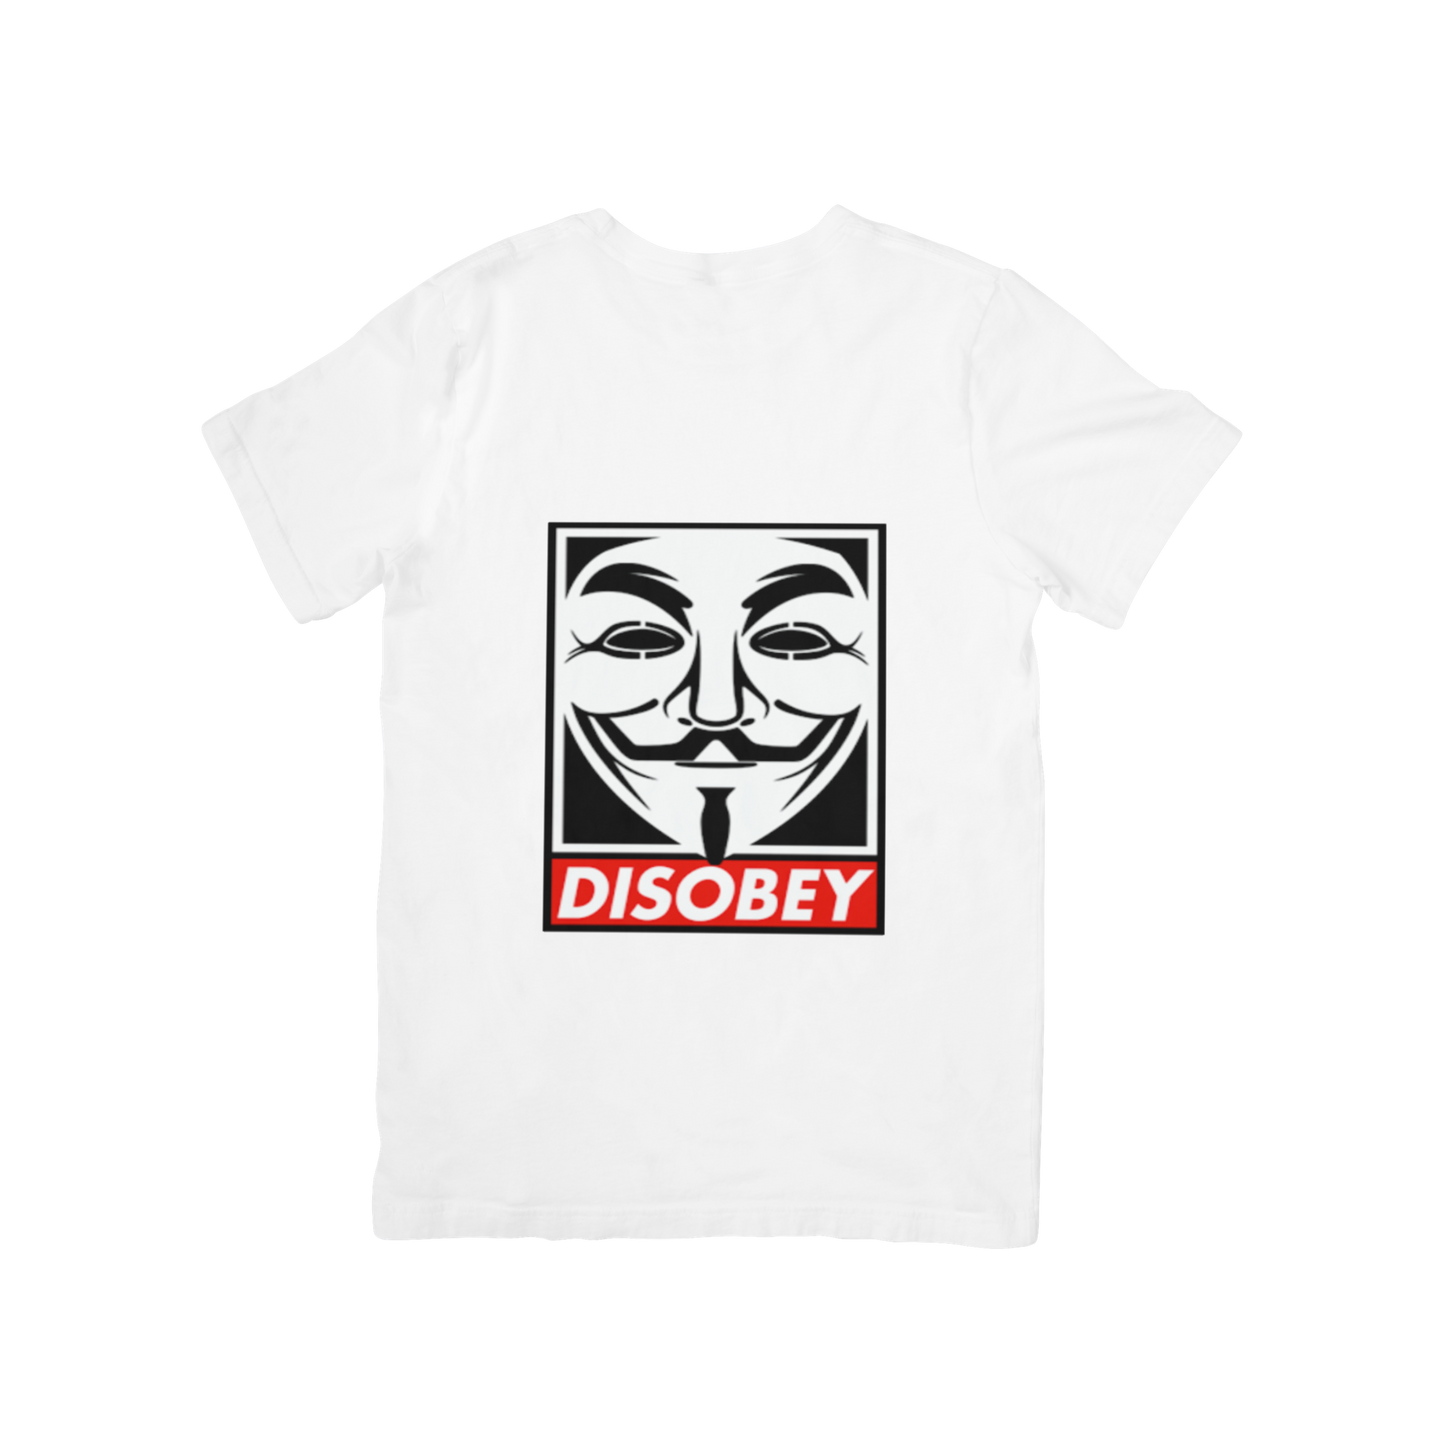 Disobey Design T shirt